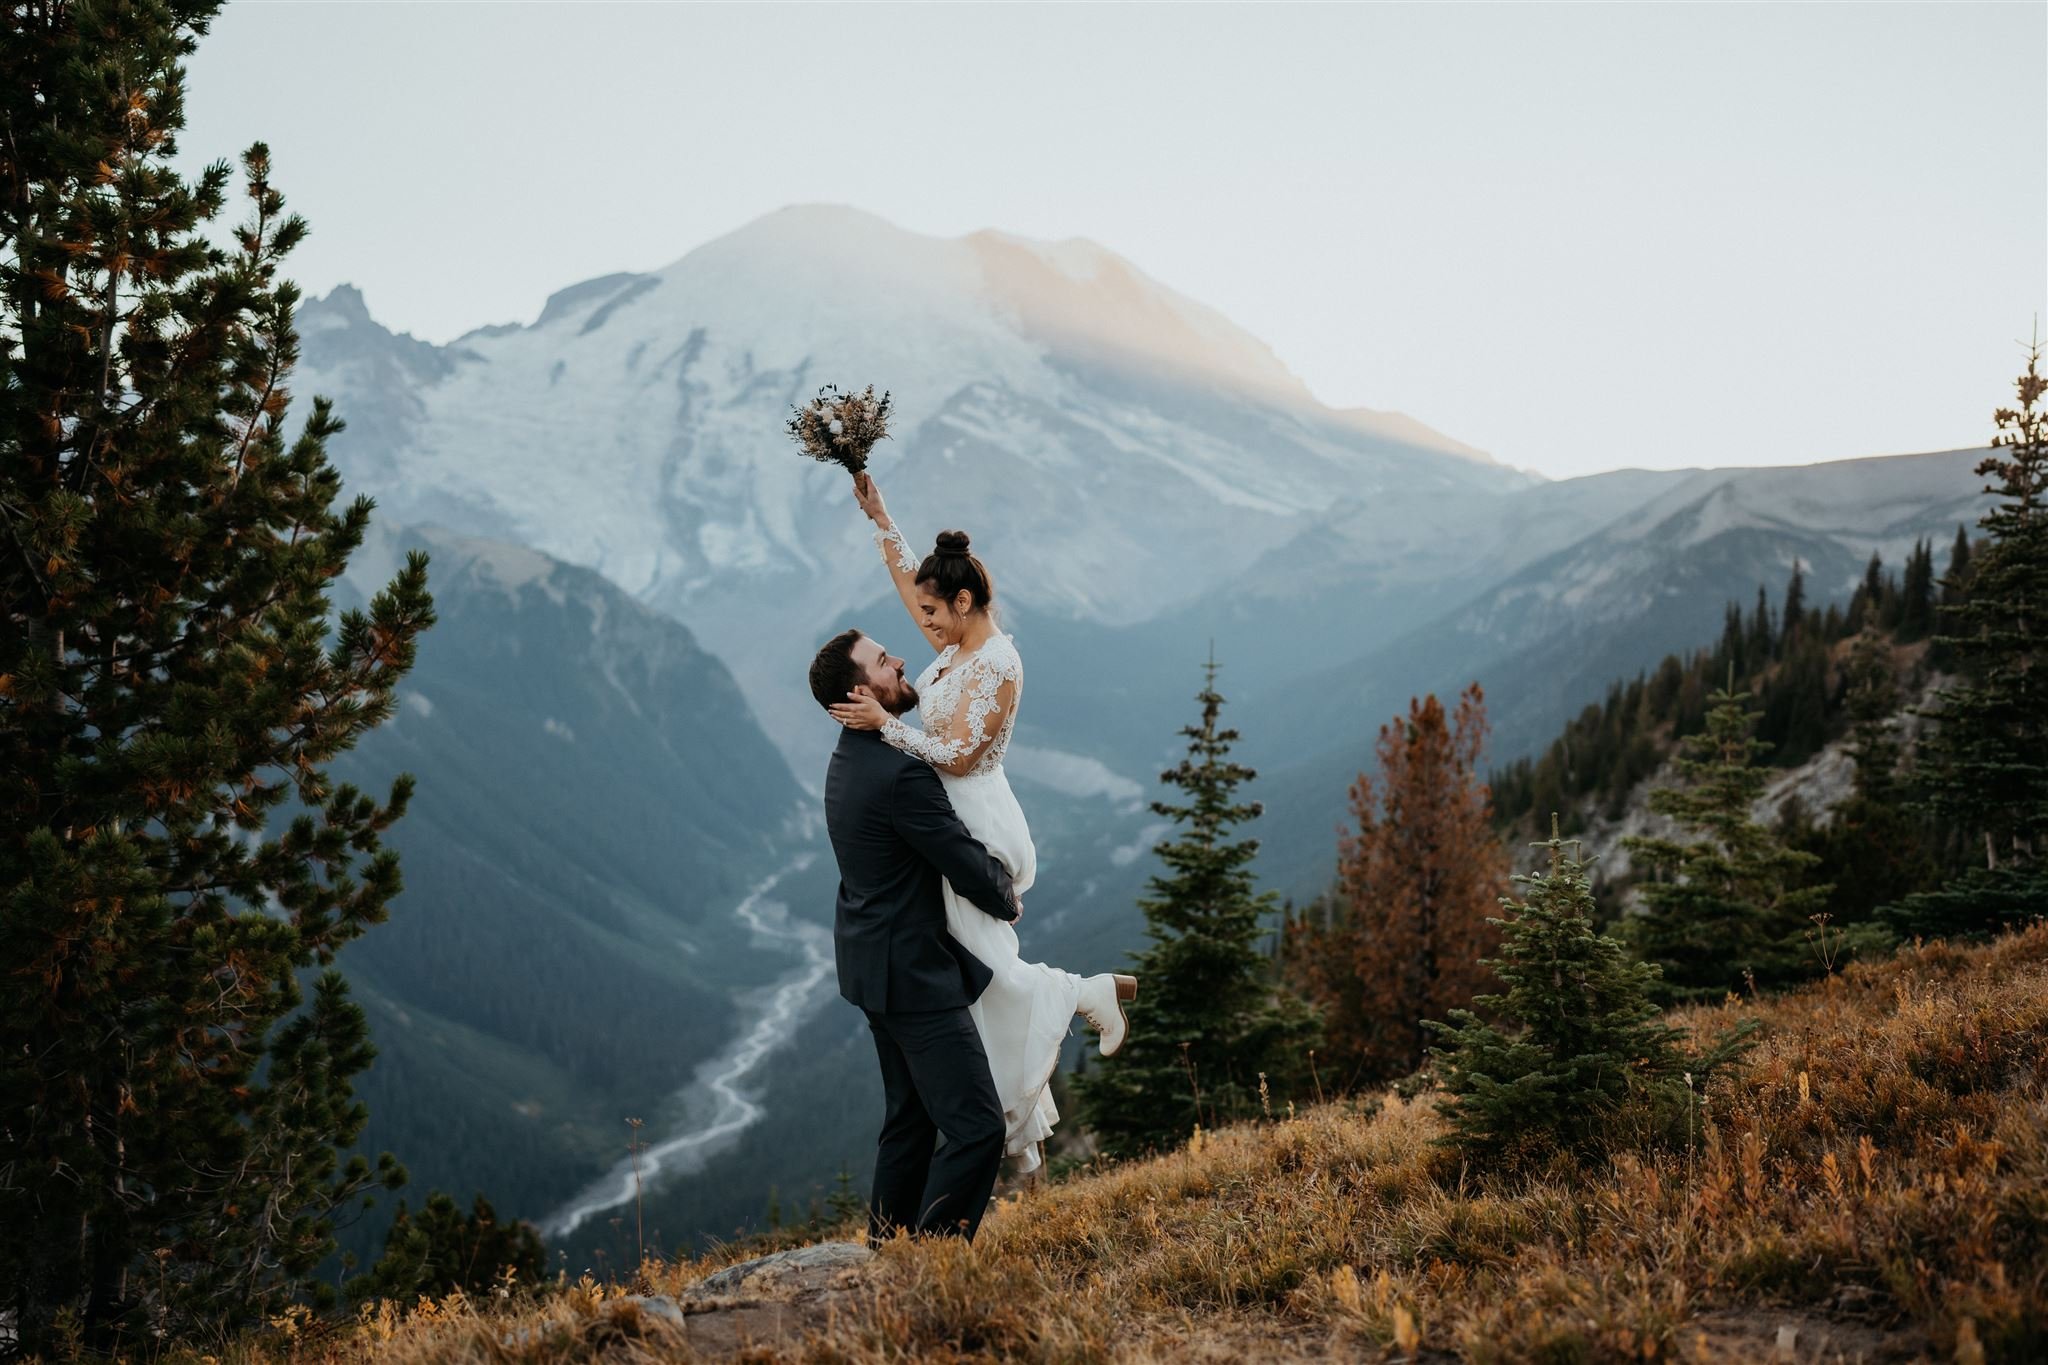 Groom lifts bride into the air during elopement at Mount Rainier